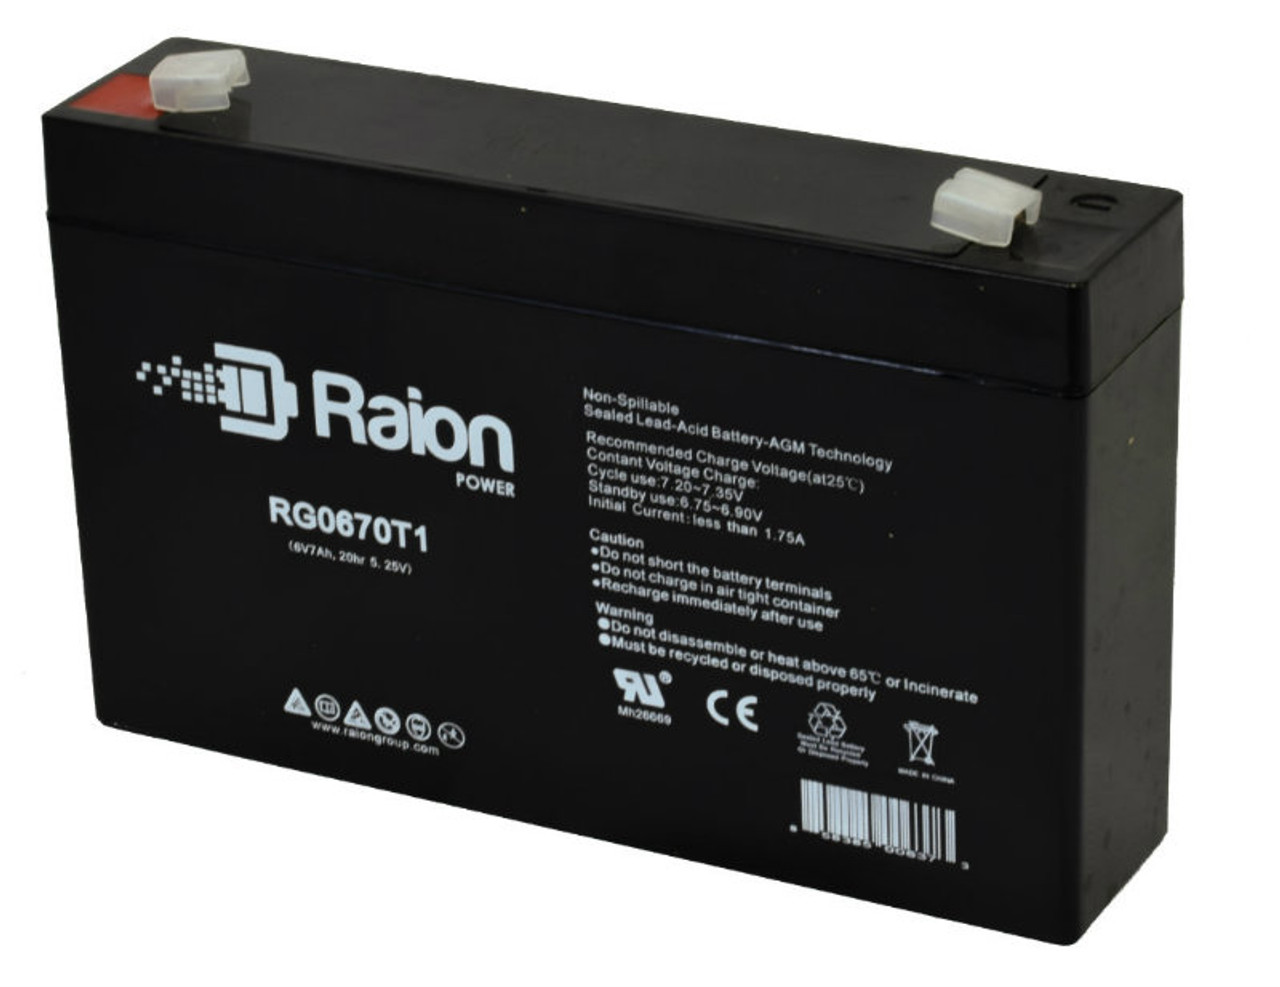 Raion Power RG0670T1 6V 7Ah Replacement Emergency Lighting Battery for Elpower EP650